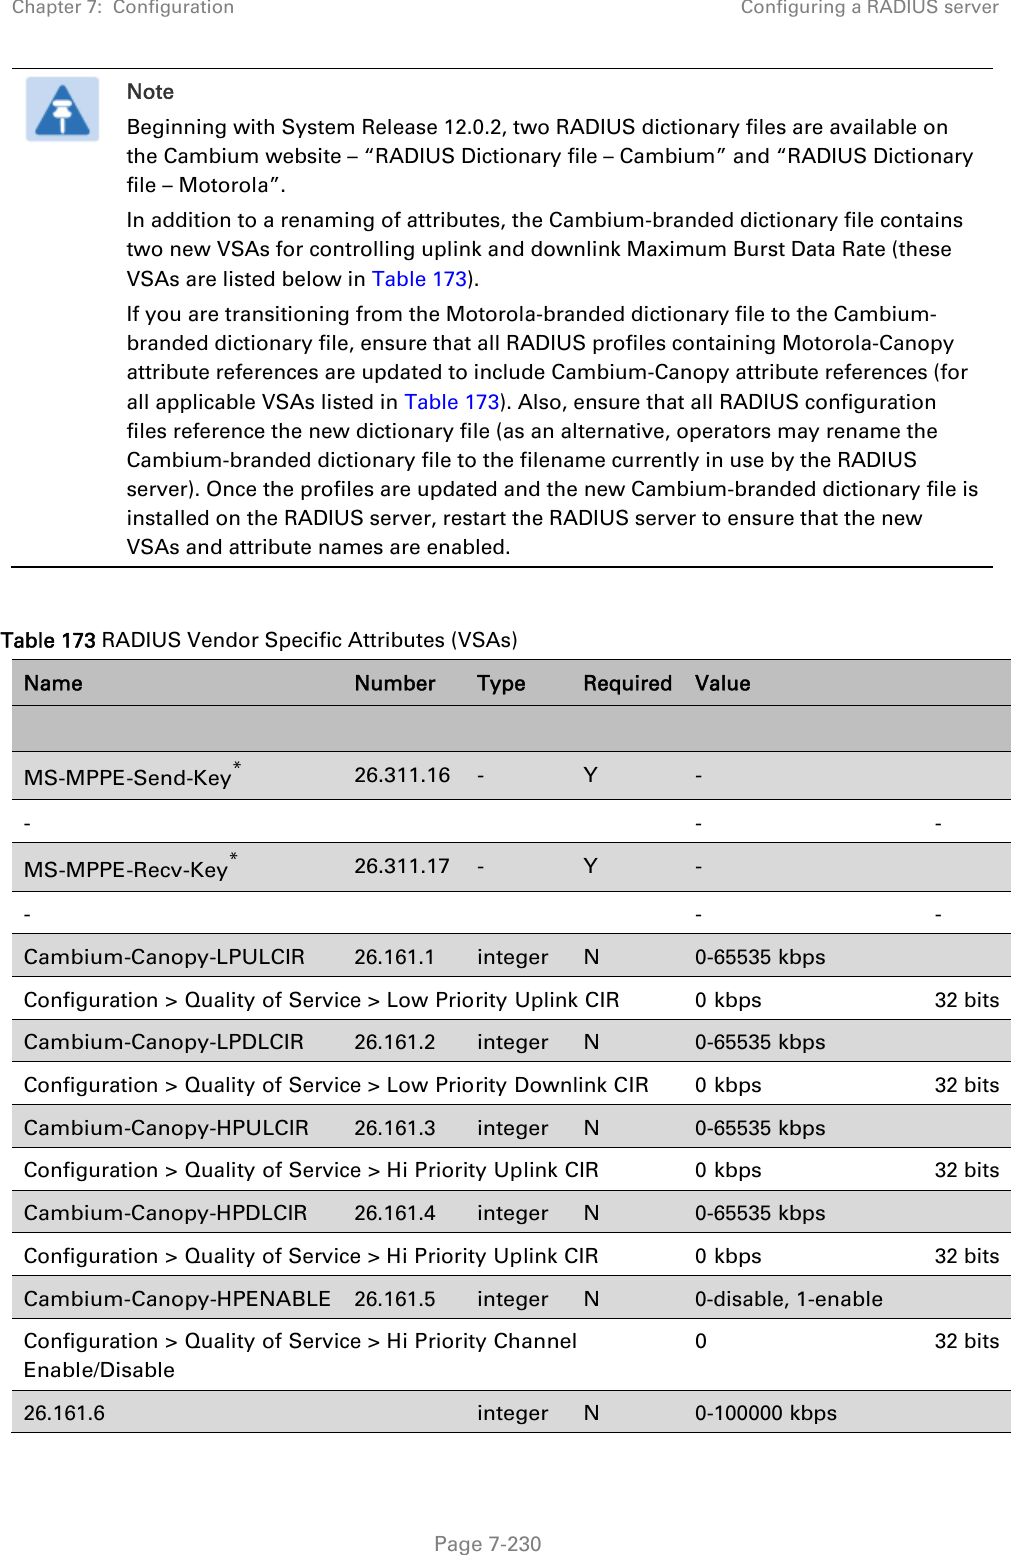 Chapter 7:  Configuration  Configuring a RADIUS server   Page 7-230  Note Beginning with System Release 12.0.2, two RADIUS dictionary files are available on the Cambium website – “RADIUS Dictionary file – Cambium” and “RADIUS Dictionary file – Motorola”. In addition to a renaming of attributes, the Cambium-branded dictionary file contains two new VSAs for controlling uplink and downlink Maximum Burst Data Rate (these VSAs are listed below in Table 173). If you are transitioning from the Motorola-branded dictionary file to the Cambium-branded dictionary file, ensure that all RADIUS profiles containing Motorola-Canopy attribute references are updated to include Cambium-Canopy attribute references (for all applicable VSAs listed in Table 173). Also, ensure that all RADIUS configuration files reference the new dictionary file (as an alternative, operators may rename the Cambium-branded dictionary file to the filename currently in use by the RADIUS server). Once the profiles are updated and the new Cambium-branded dictionary file is installed on the RADIUS server, restart the RADIUS server to ensure that the new VSAs and attribute names are enabled.  Table 173 RADIUS Vendor Specific Attributes (VSAs) Name  Number  Type  Required Value              MS-MPPE-Send-Key* 26.311.16 - Y -   -    - - MS-MPPE-Recv-Key* 26.311.17 - Y -   -    - - Cambium-Canopy-LPULCIR 26.161.1 integer  N 0-65535 kbps   Configuration &gt; Quality of Service &gt; Low Priority Uplink CIR 0 kbps 32 bits Cambium-Canopy-LPDLCIR 26.161.2 integer  N 0-65535 kbps   Configuration &gt; Quality of Service &gt; Low Priority Downlink CIR 0 kbps 32 bits Cambium-Canopy-HPULCIR 26.161.3 integer N 0-65535 kbps   Configuration &gt; Quality of Service &gt; Hi Priority Uplink CIR 0 kbps 32 bits Cambium-Canopy-HPDLCIR 26.161.4 integer N 0-65535 kbps   Configuration &gt; Quality of Service &gt; Hi Priority Uplink CIR 0 kbps 32 bits Cambium-Canopy-HPENABLE 26.161.5 integer N 0-disable, 1-enable   Configuration &gt; Quality of Service &gt; Hi Priority Channel Enable/Disable 0 32 bits 26.161.6  integer N 0-100000 kbps   